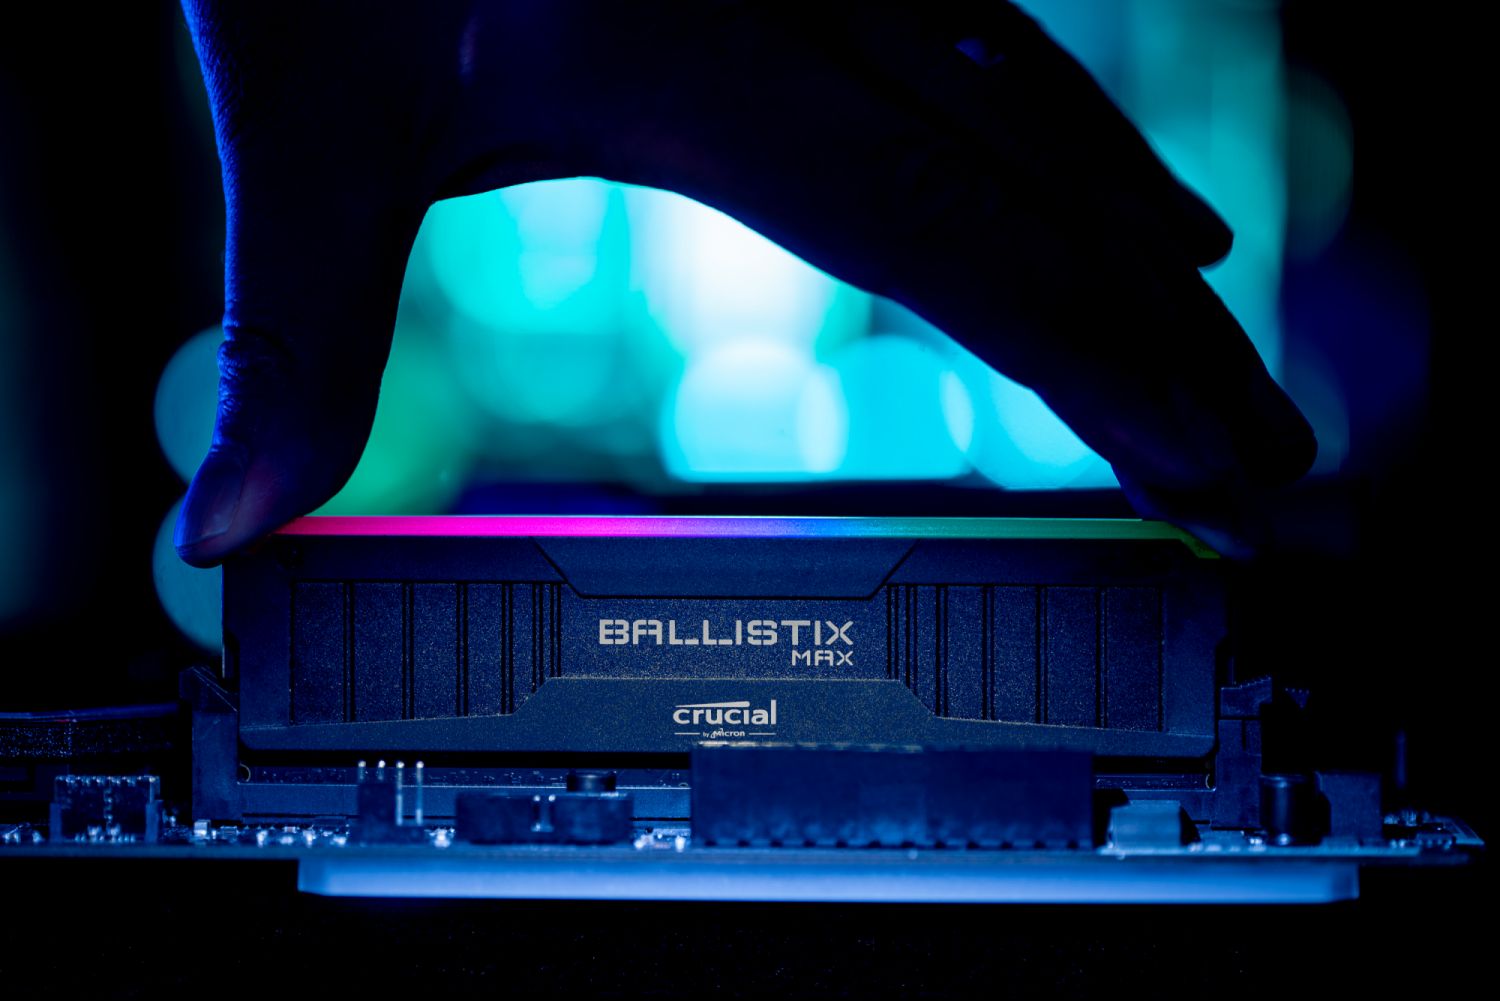 https://www.crucial.in/content/dam/crucial/dram-products/ballistix-max-udimm/images/in-use/Crucial-Ballistix-Ultimate-Mod-MAX-Image.psd.transform/large-jpg/img.jpg